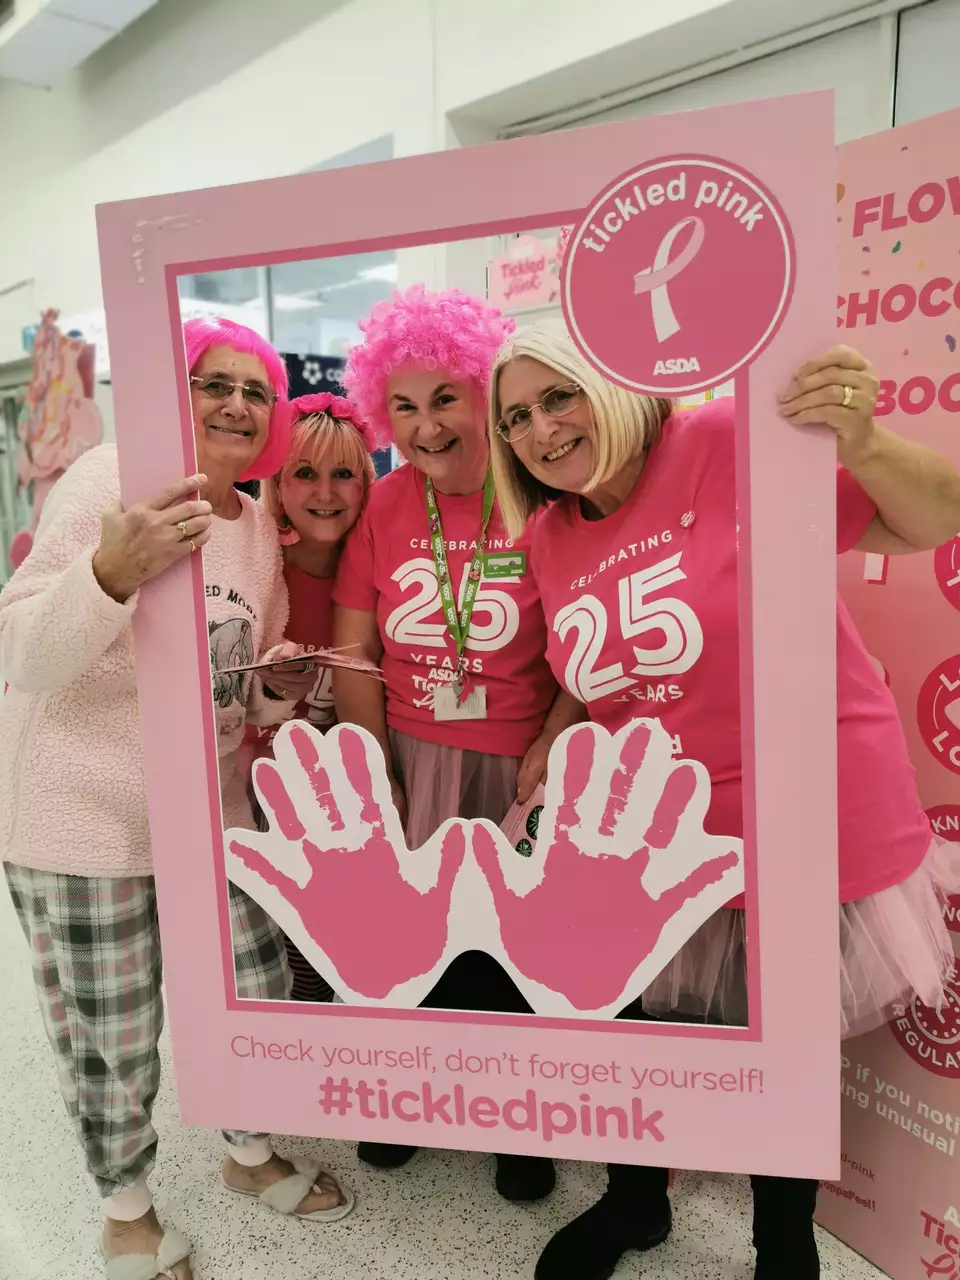 Four 'breast friends' from Asda Thornaby support Tickled Pink breast cancer charity